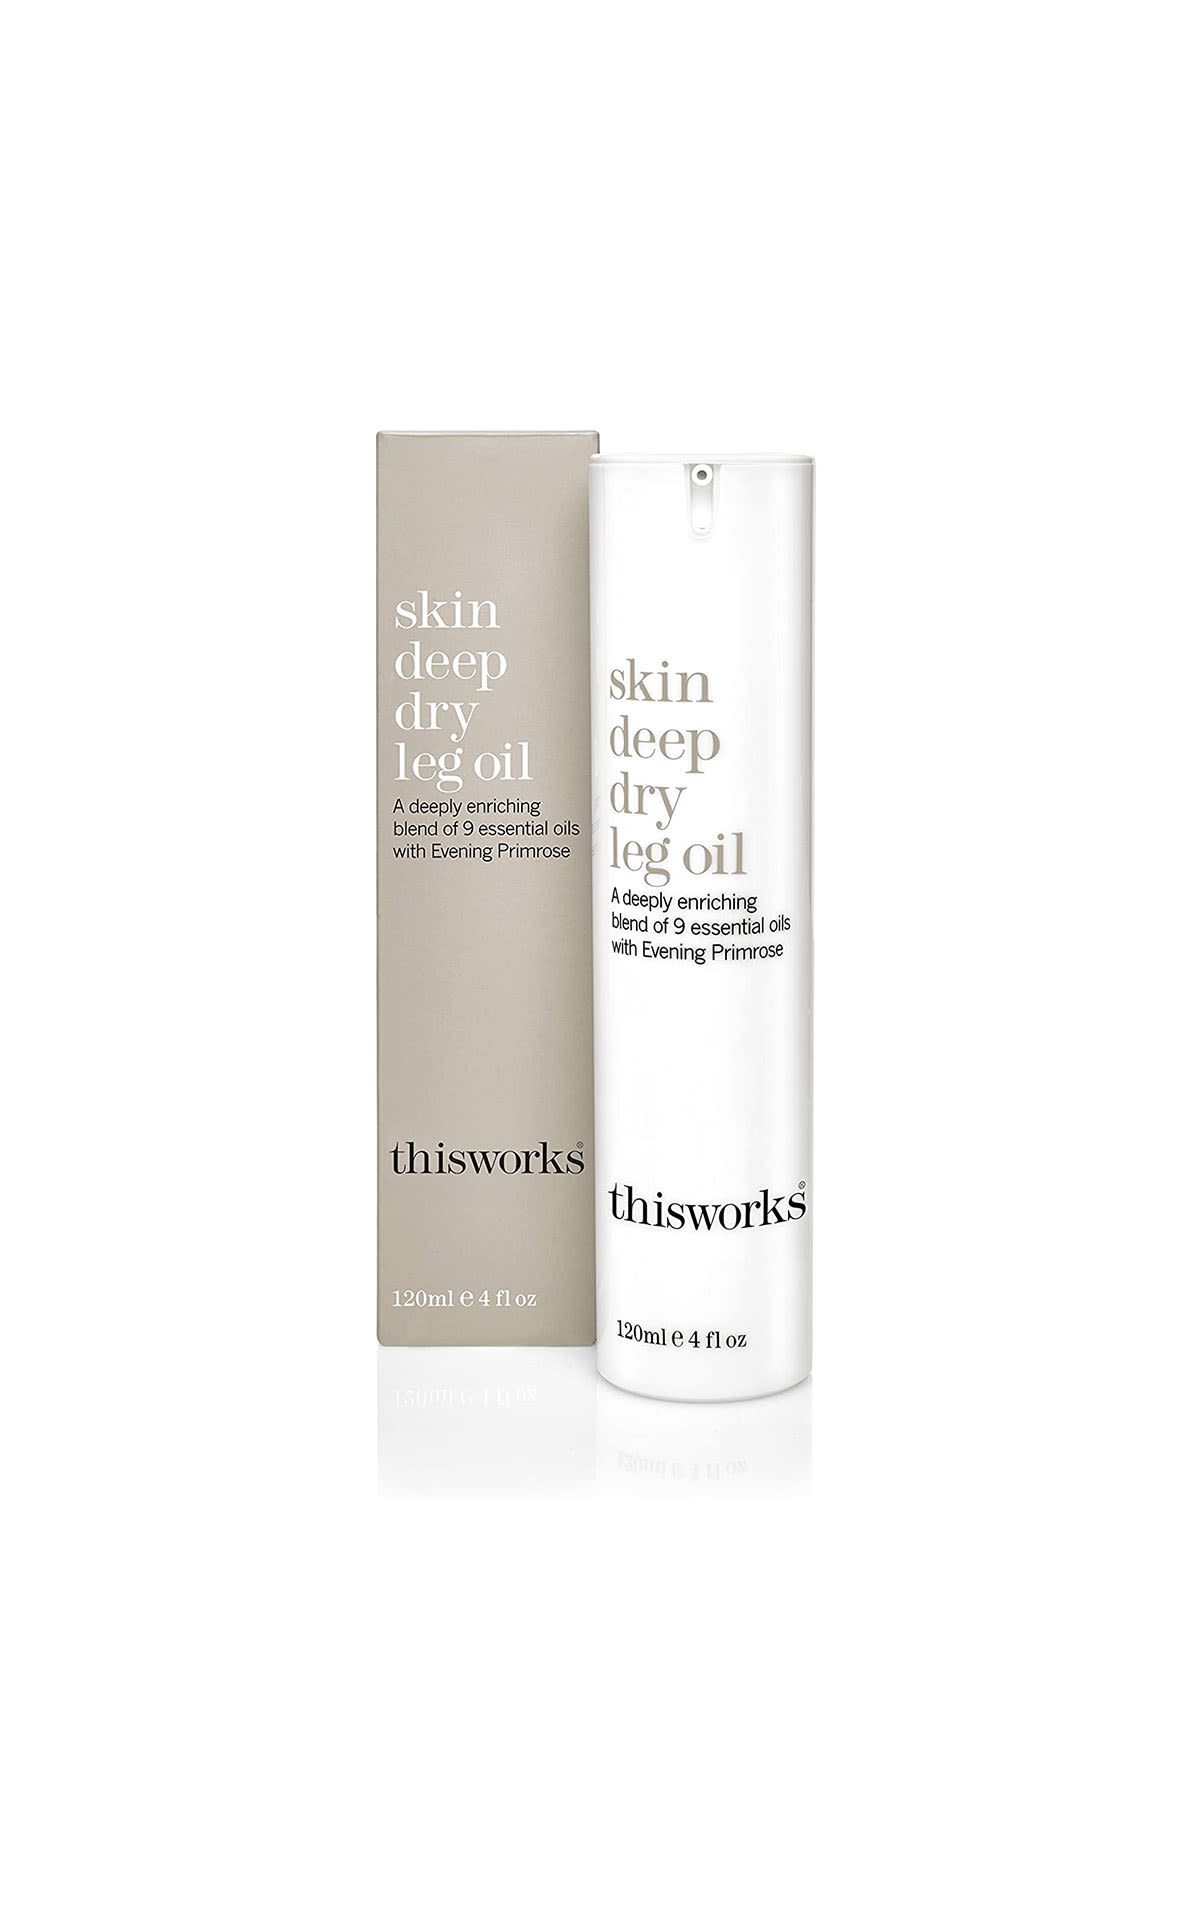 This Works Skin deep dry leg oil 120ml from Bicester Village